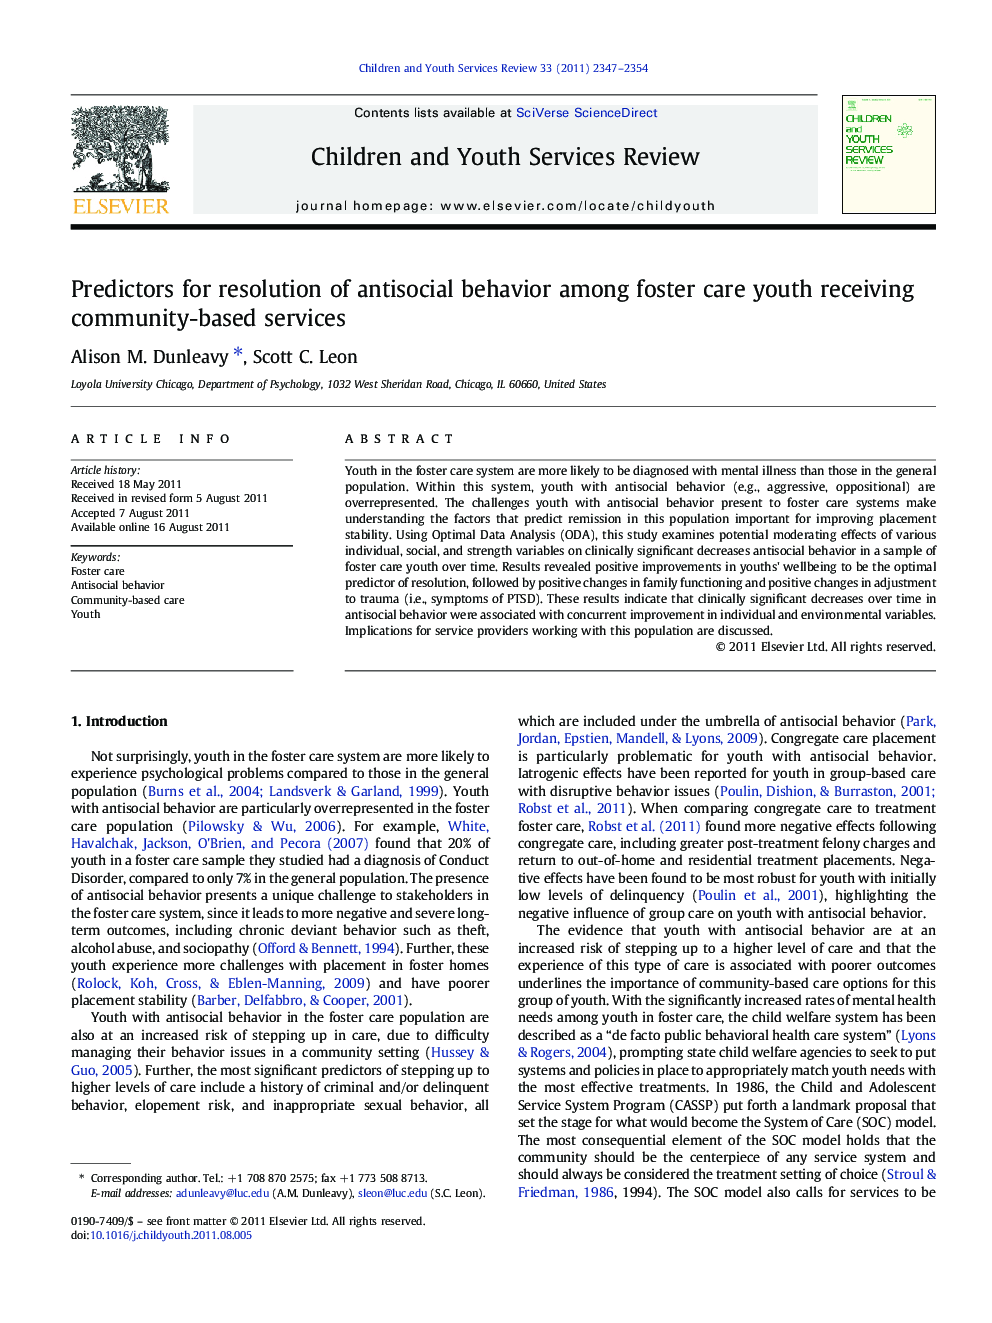 Predictors for resolution of antisocial behavior among foster care youth receiving community-based services